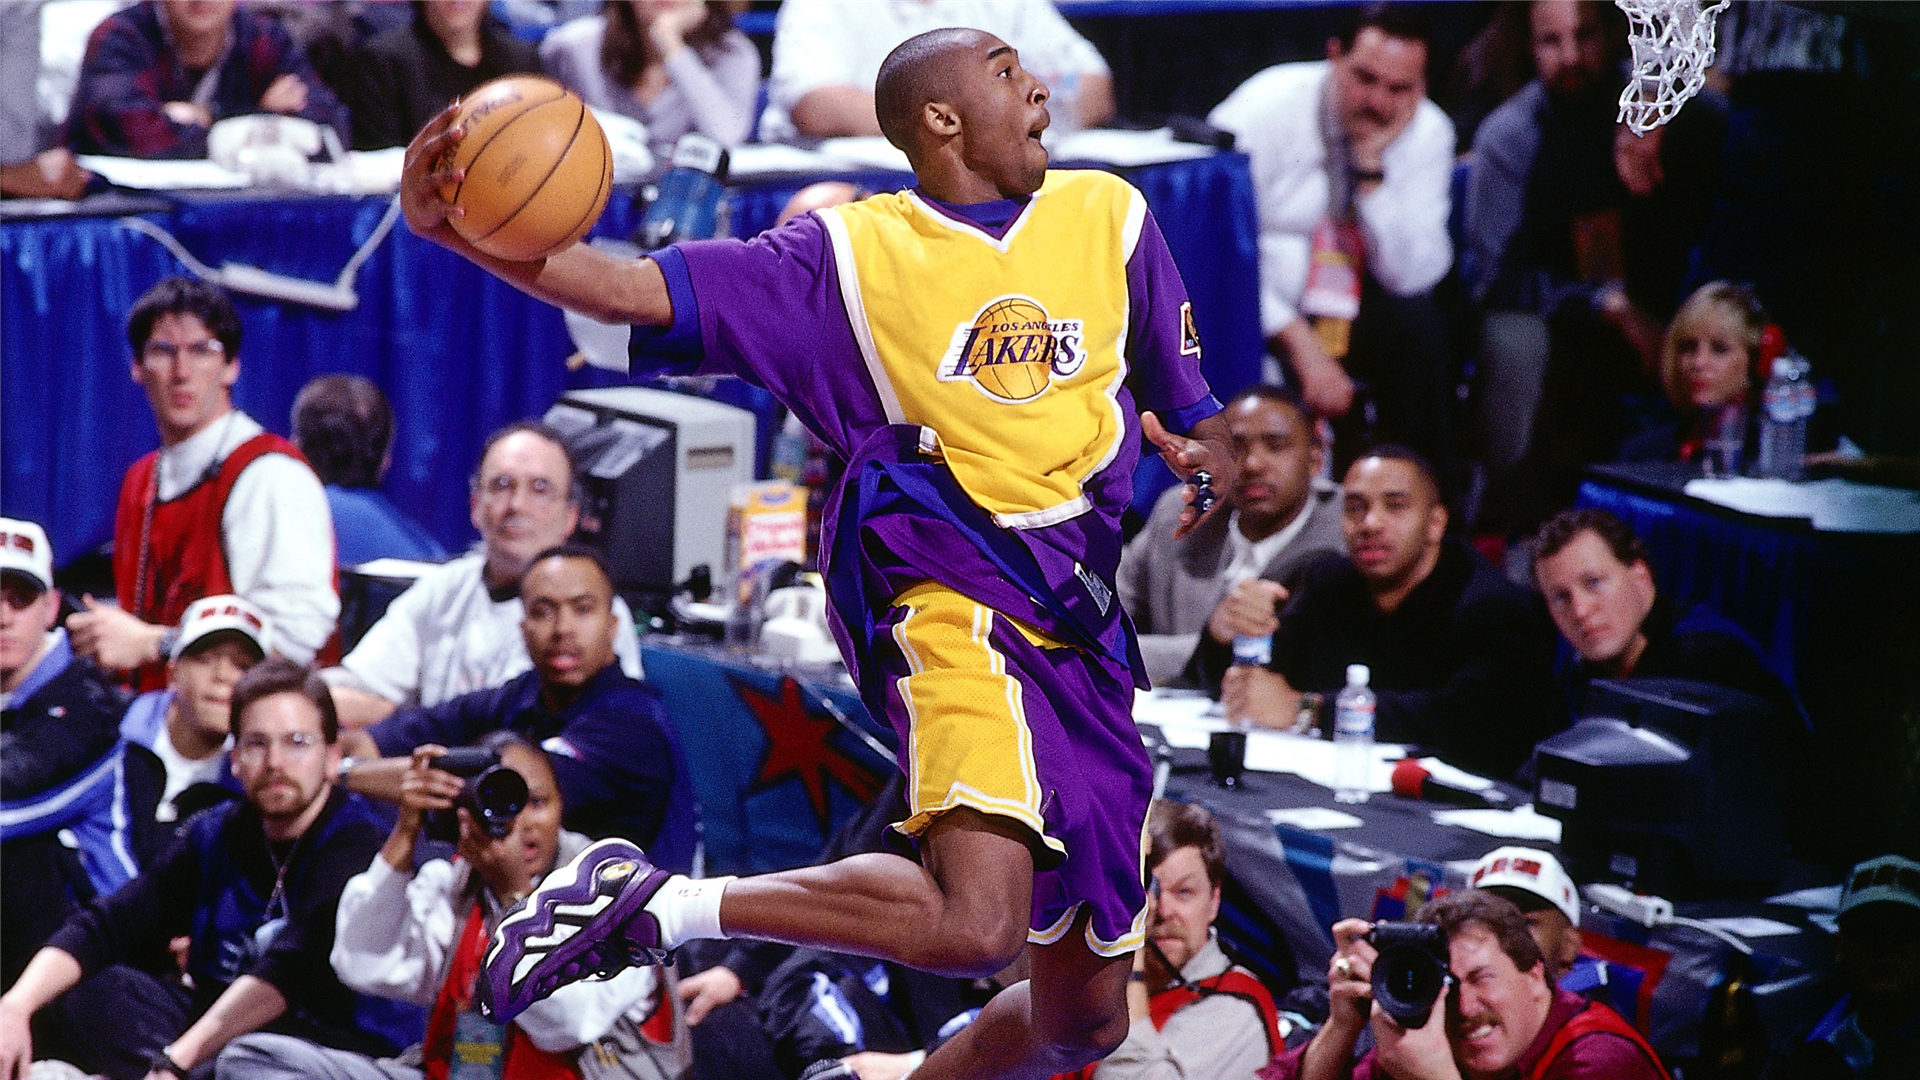 Kobe Bryant won the dunk contest as a rookie